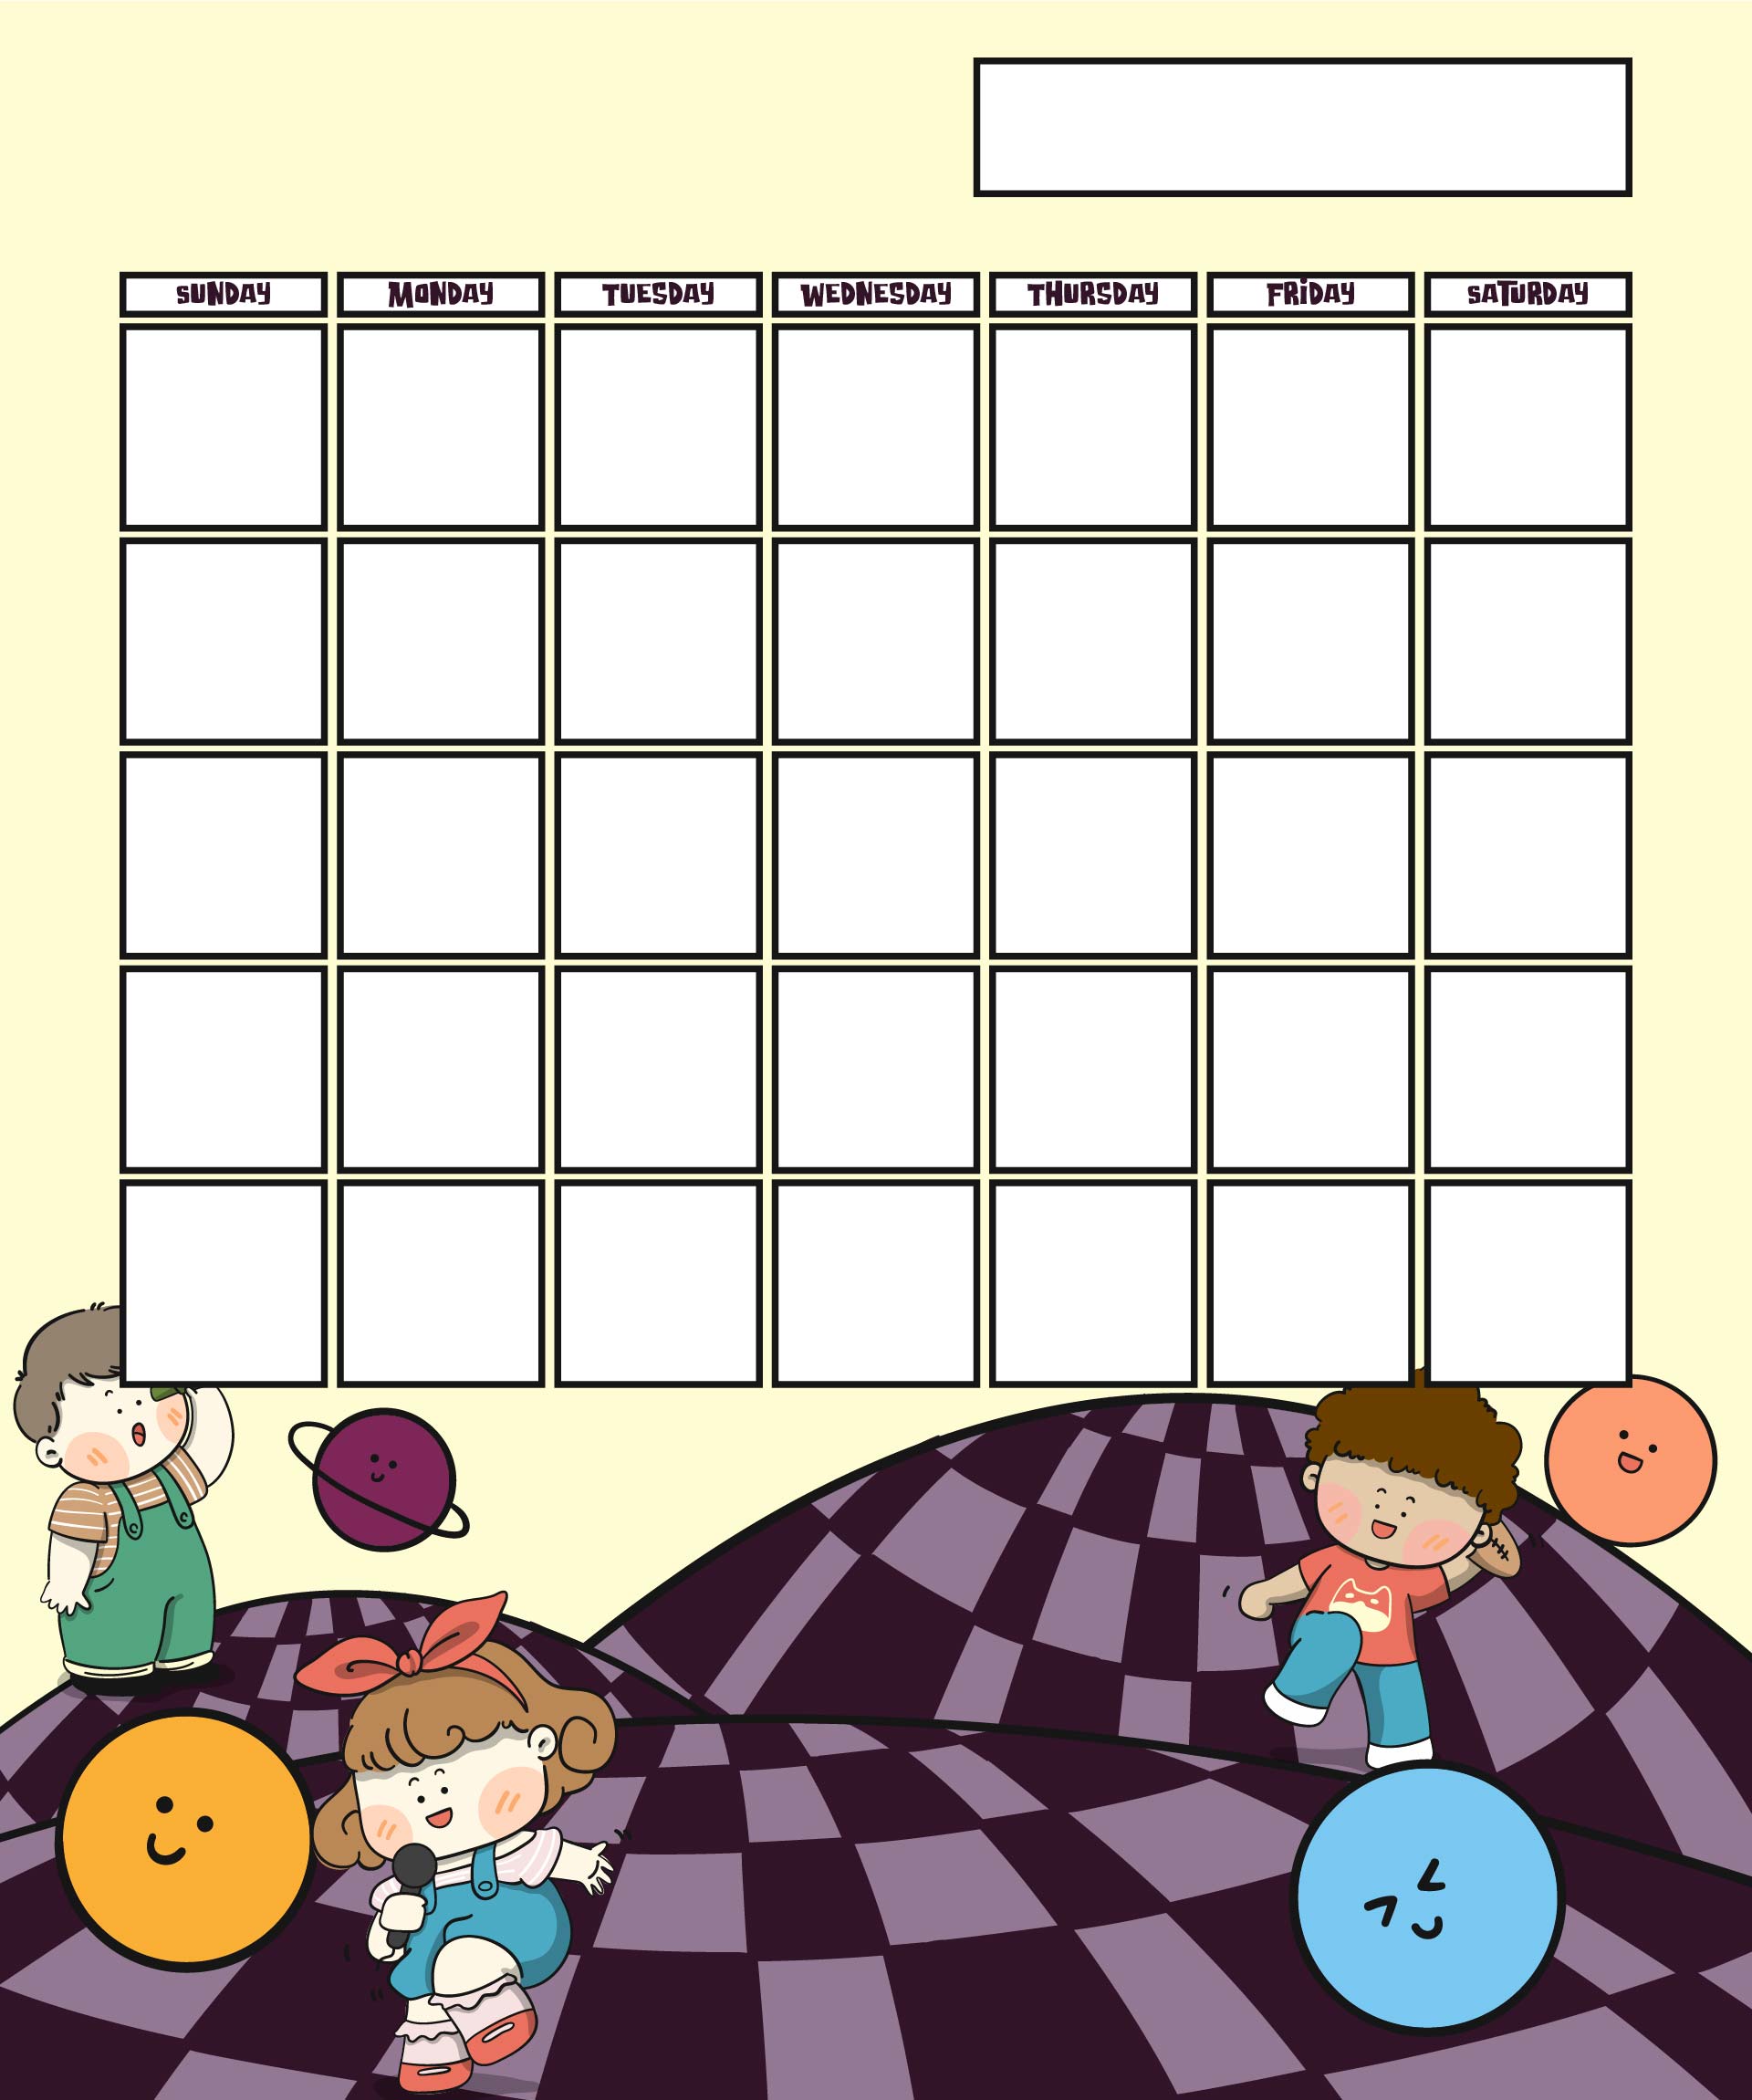 calendars to print qualads download printable floral design monthly